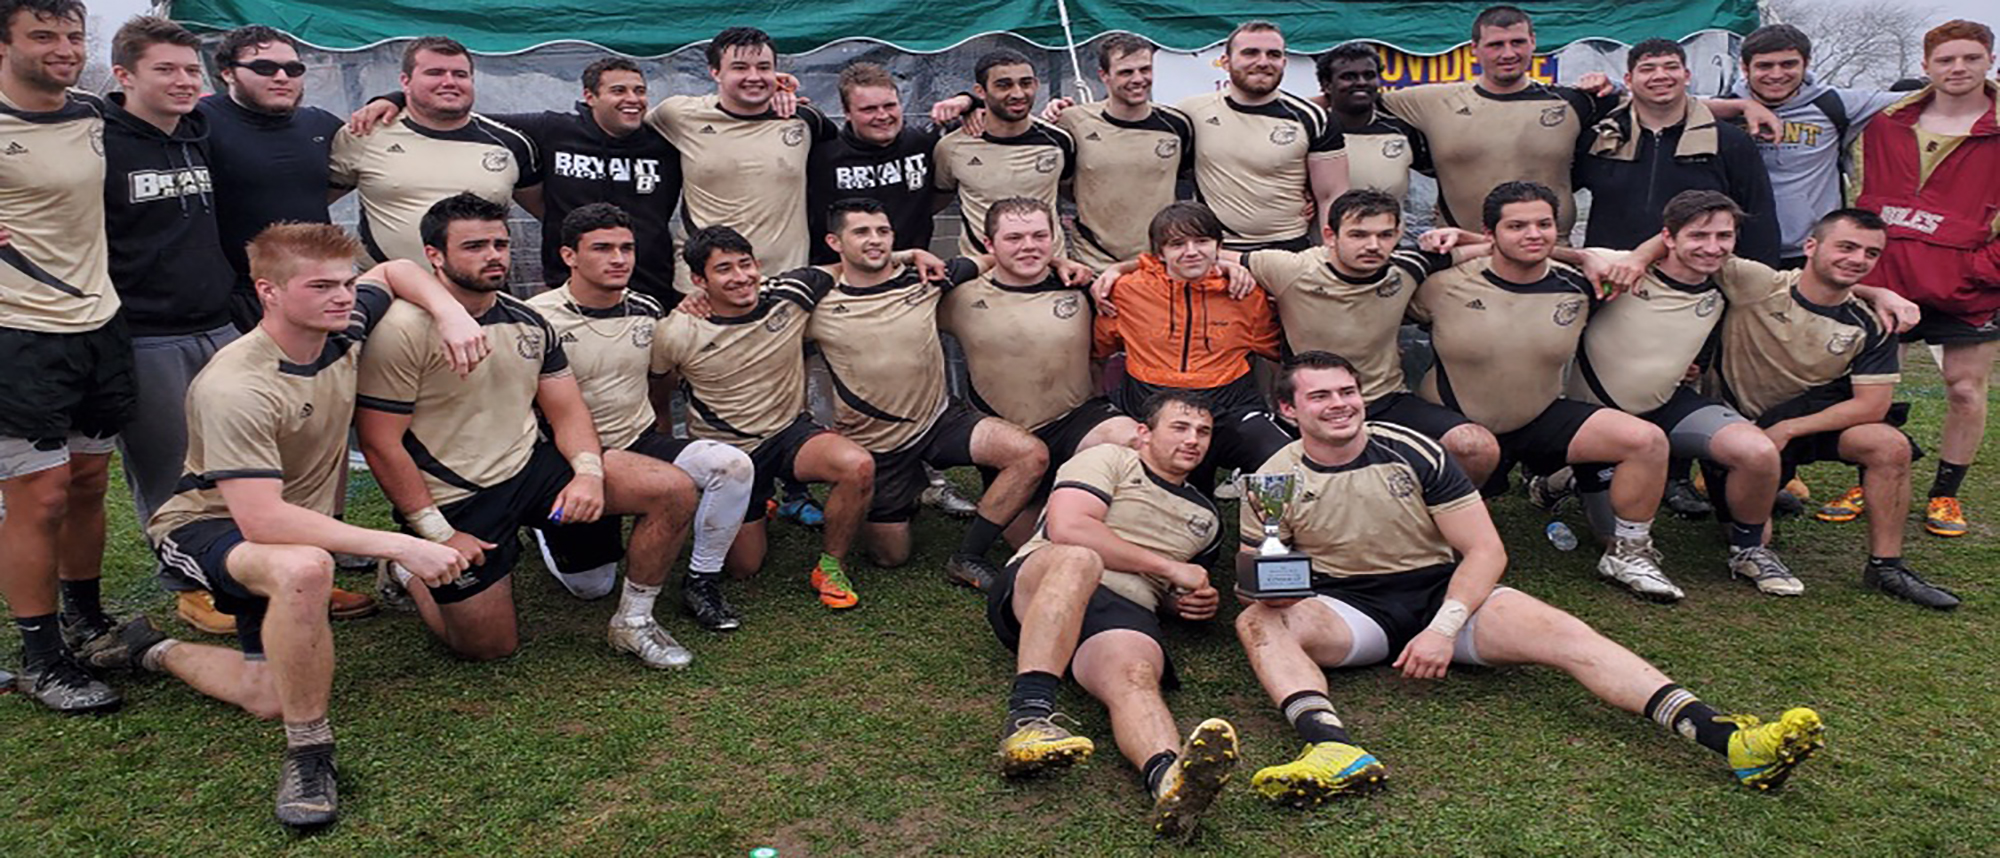 MEN'S RUGBY SUMS UP YEAR AFTER SPRING SEASON CANCELLATION